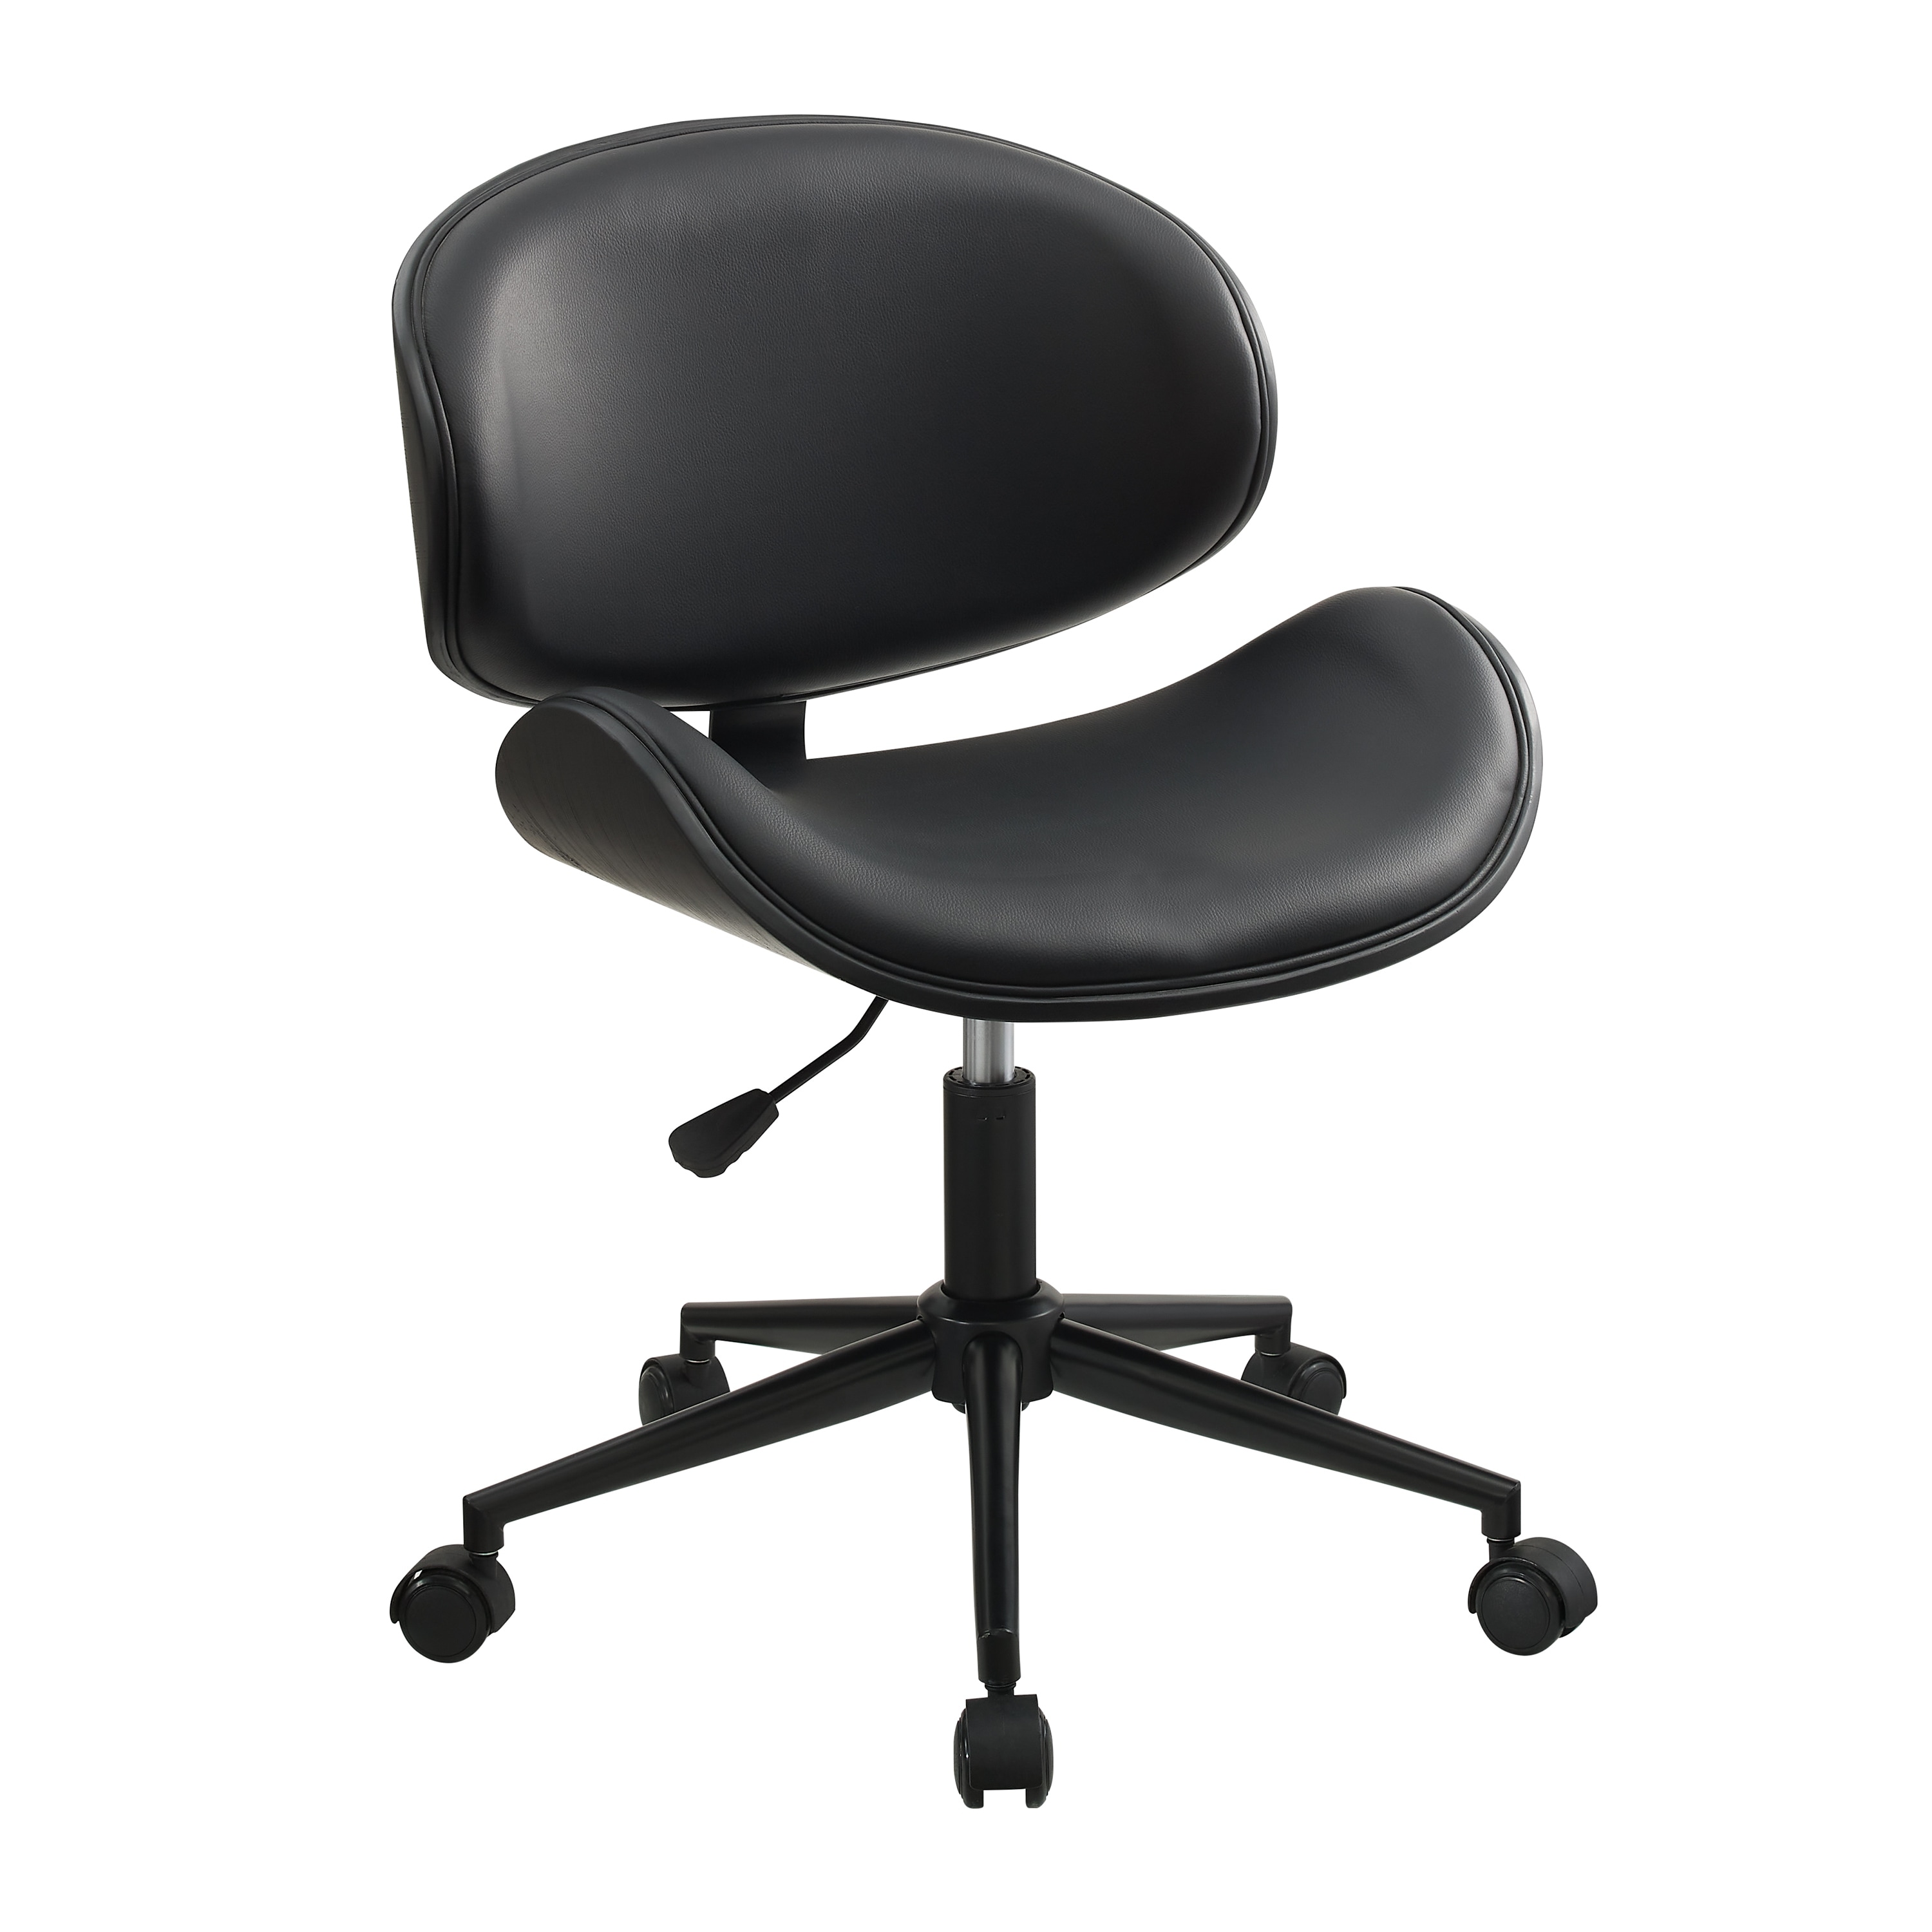 https://ak1.ostkcdn.com/images/products/is/images/direct/9dc0513a84ff0ae254323f4a37d5abc1828545d0/Madonna-Mid-century-Modern-Adjustable-Curved-Office-Chair-by-Corvus.jpg